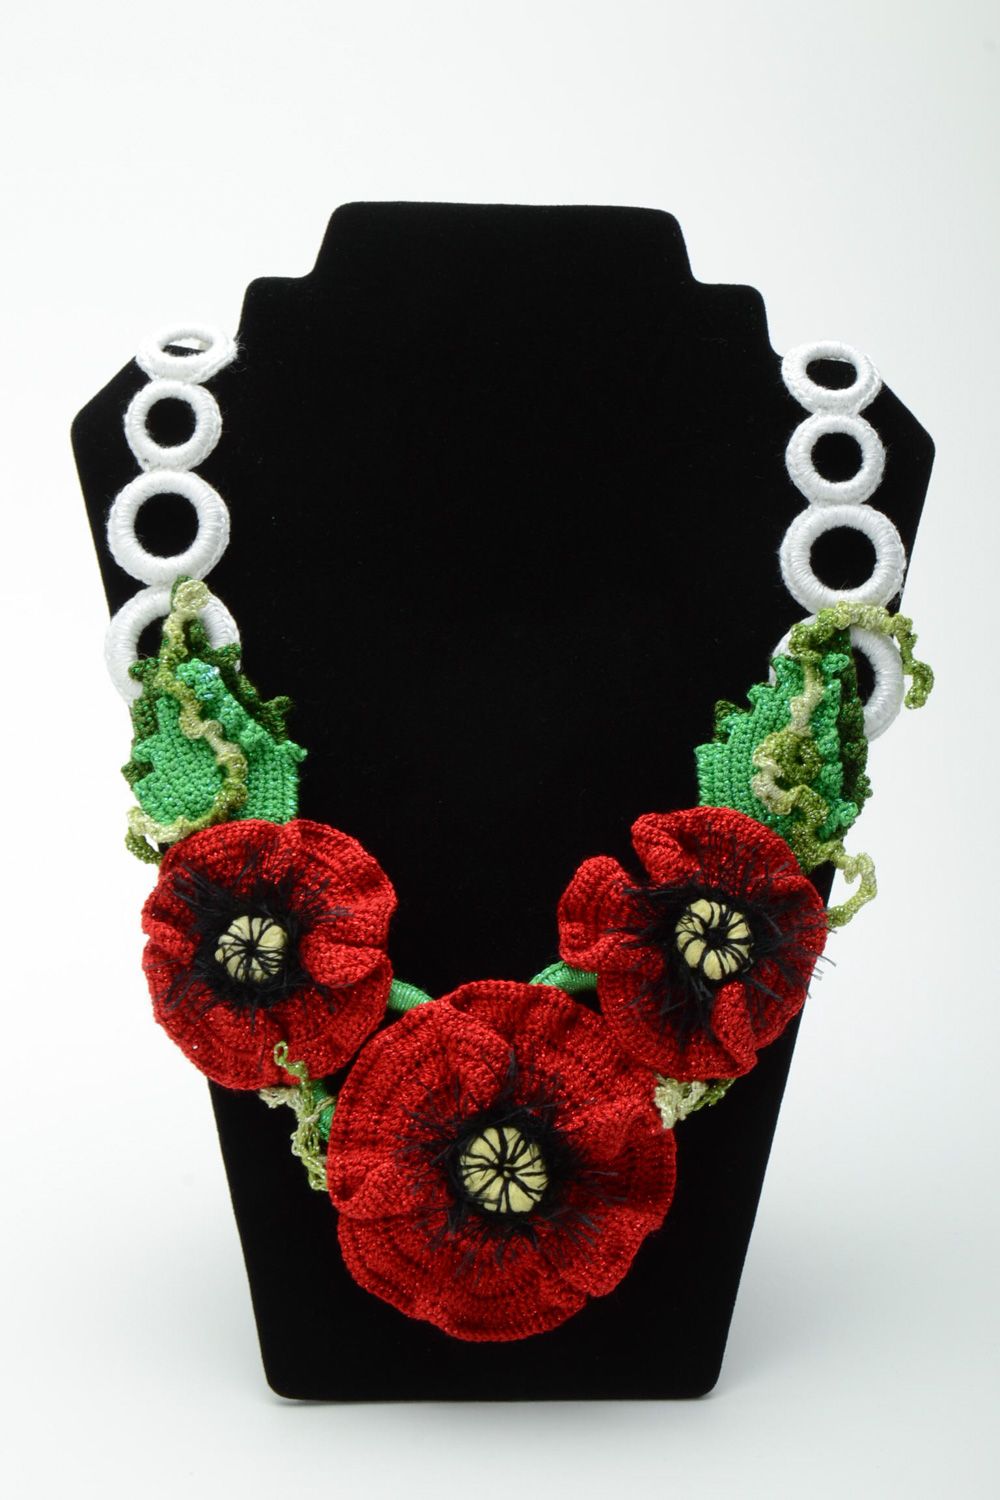 Handmade crochet acrylic and cotton necklace with poppies photo 1